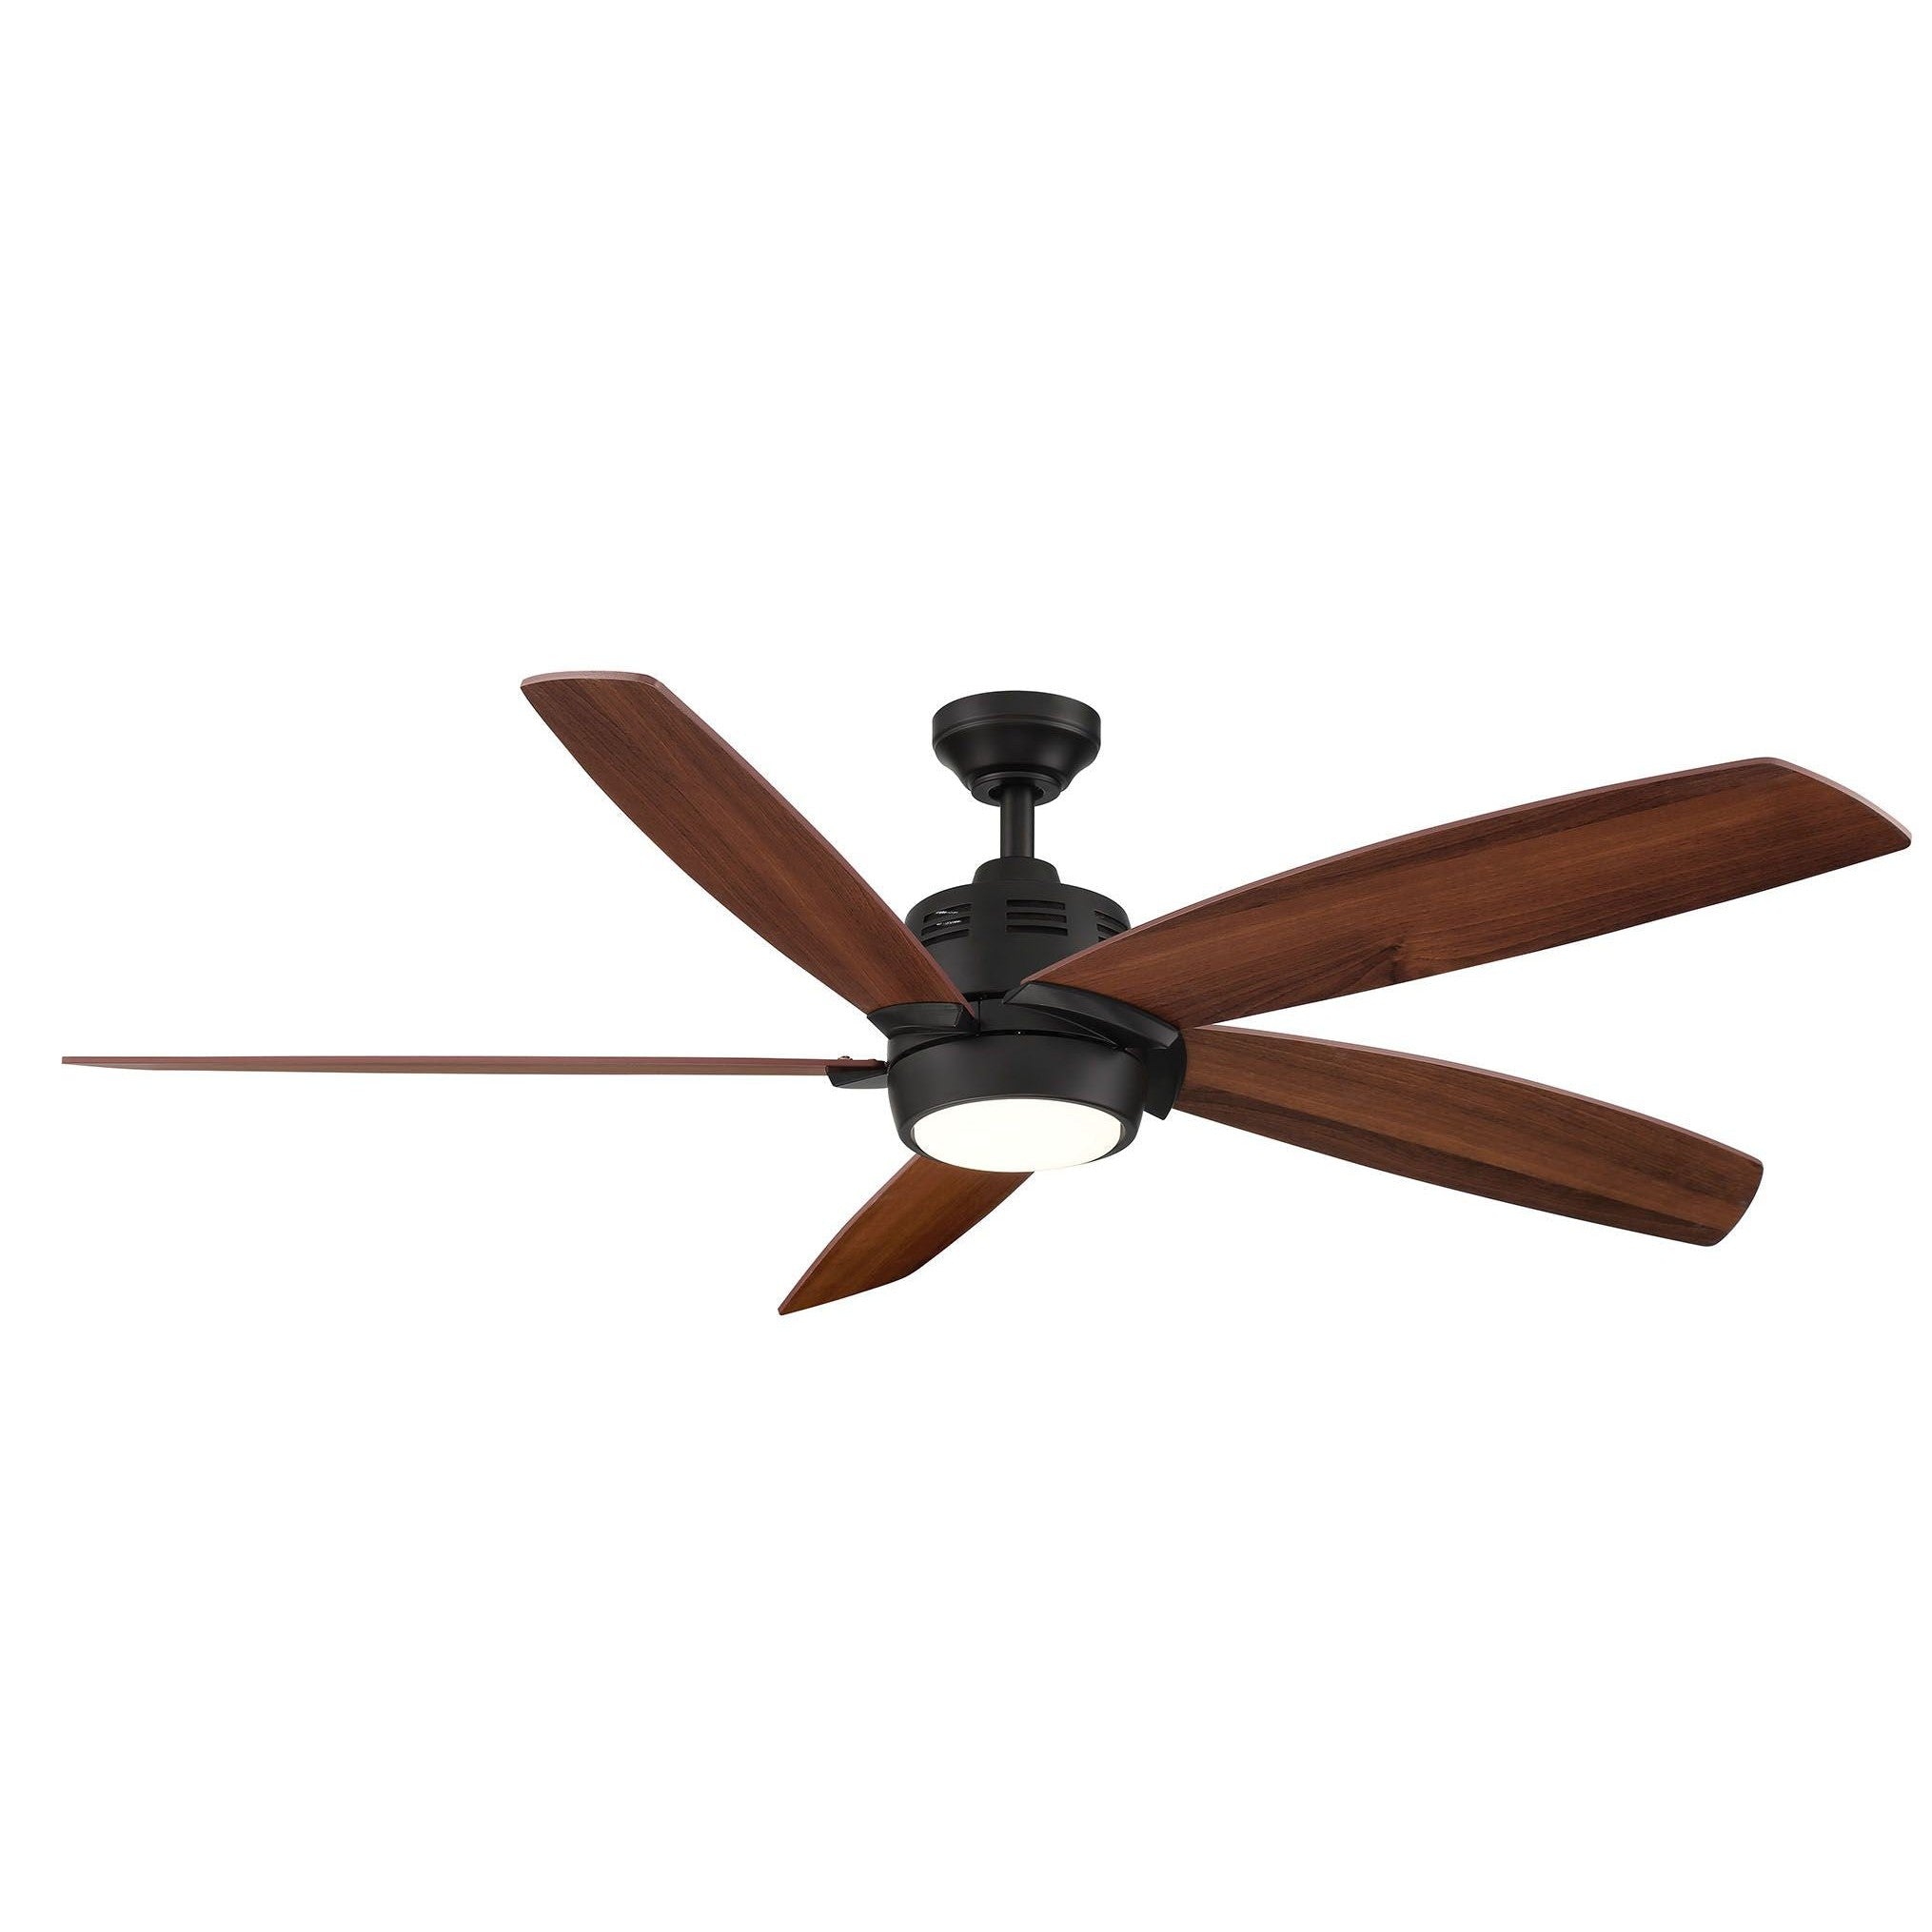 Wind River Armand 56" 5 Blade Pull Chain LED Ceiling Fan - Image 1